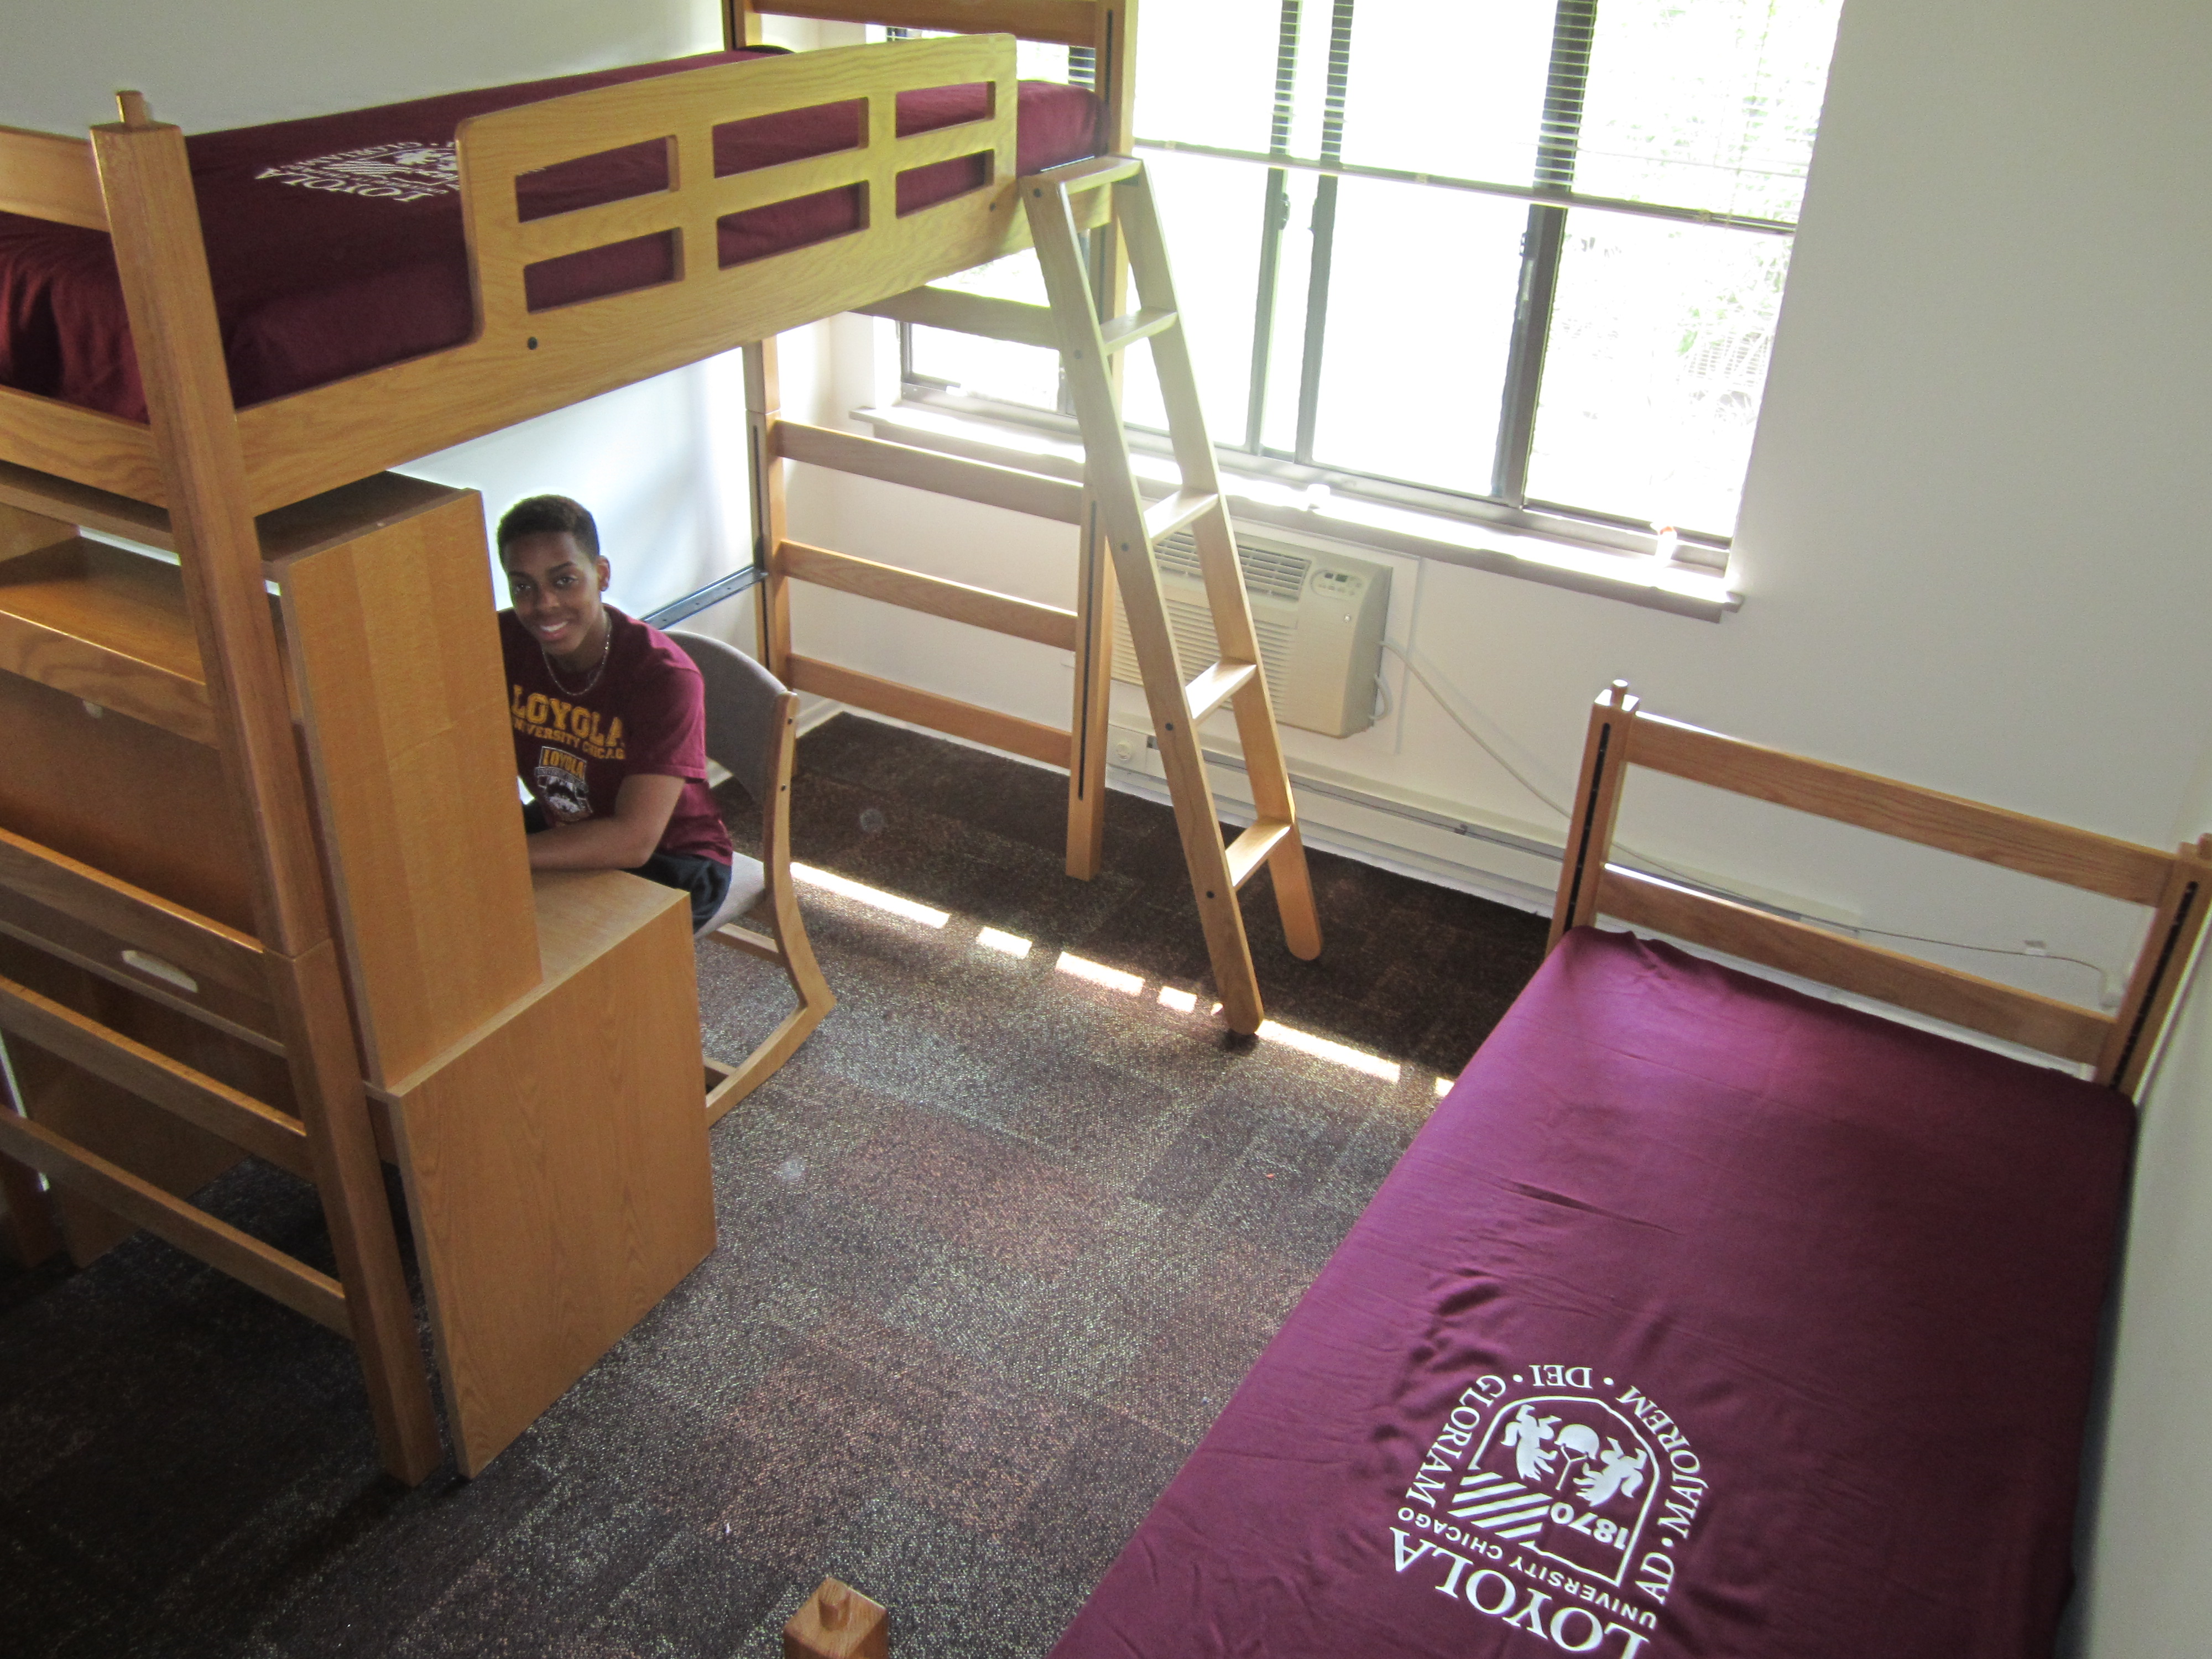 Photo of dorm room with bunk beds and a student at a desk below a bunk bed